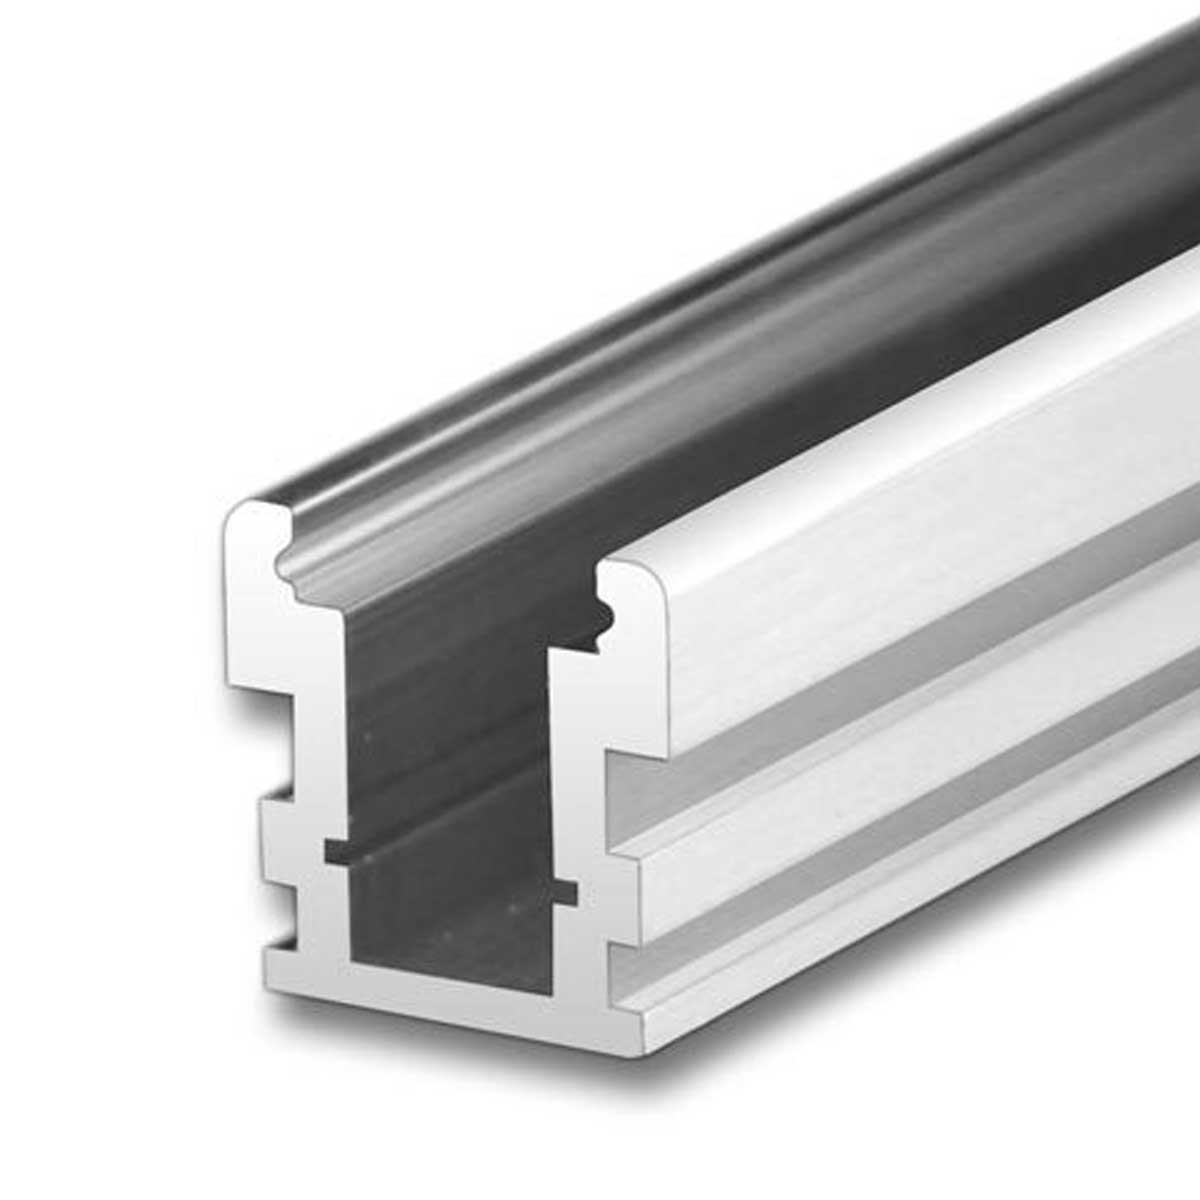 1000 Aluminium Slotted Channel Manufacturers, Suppliers in Panchkula